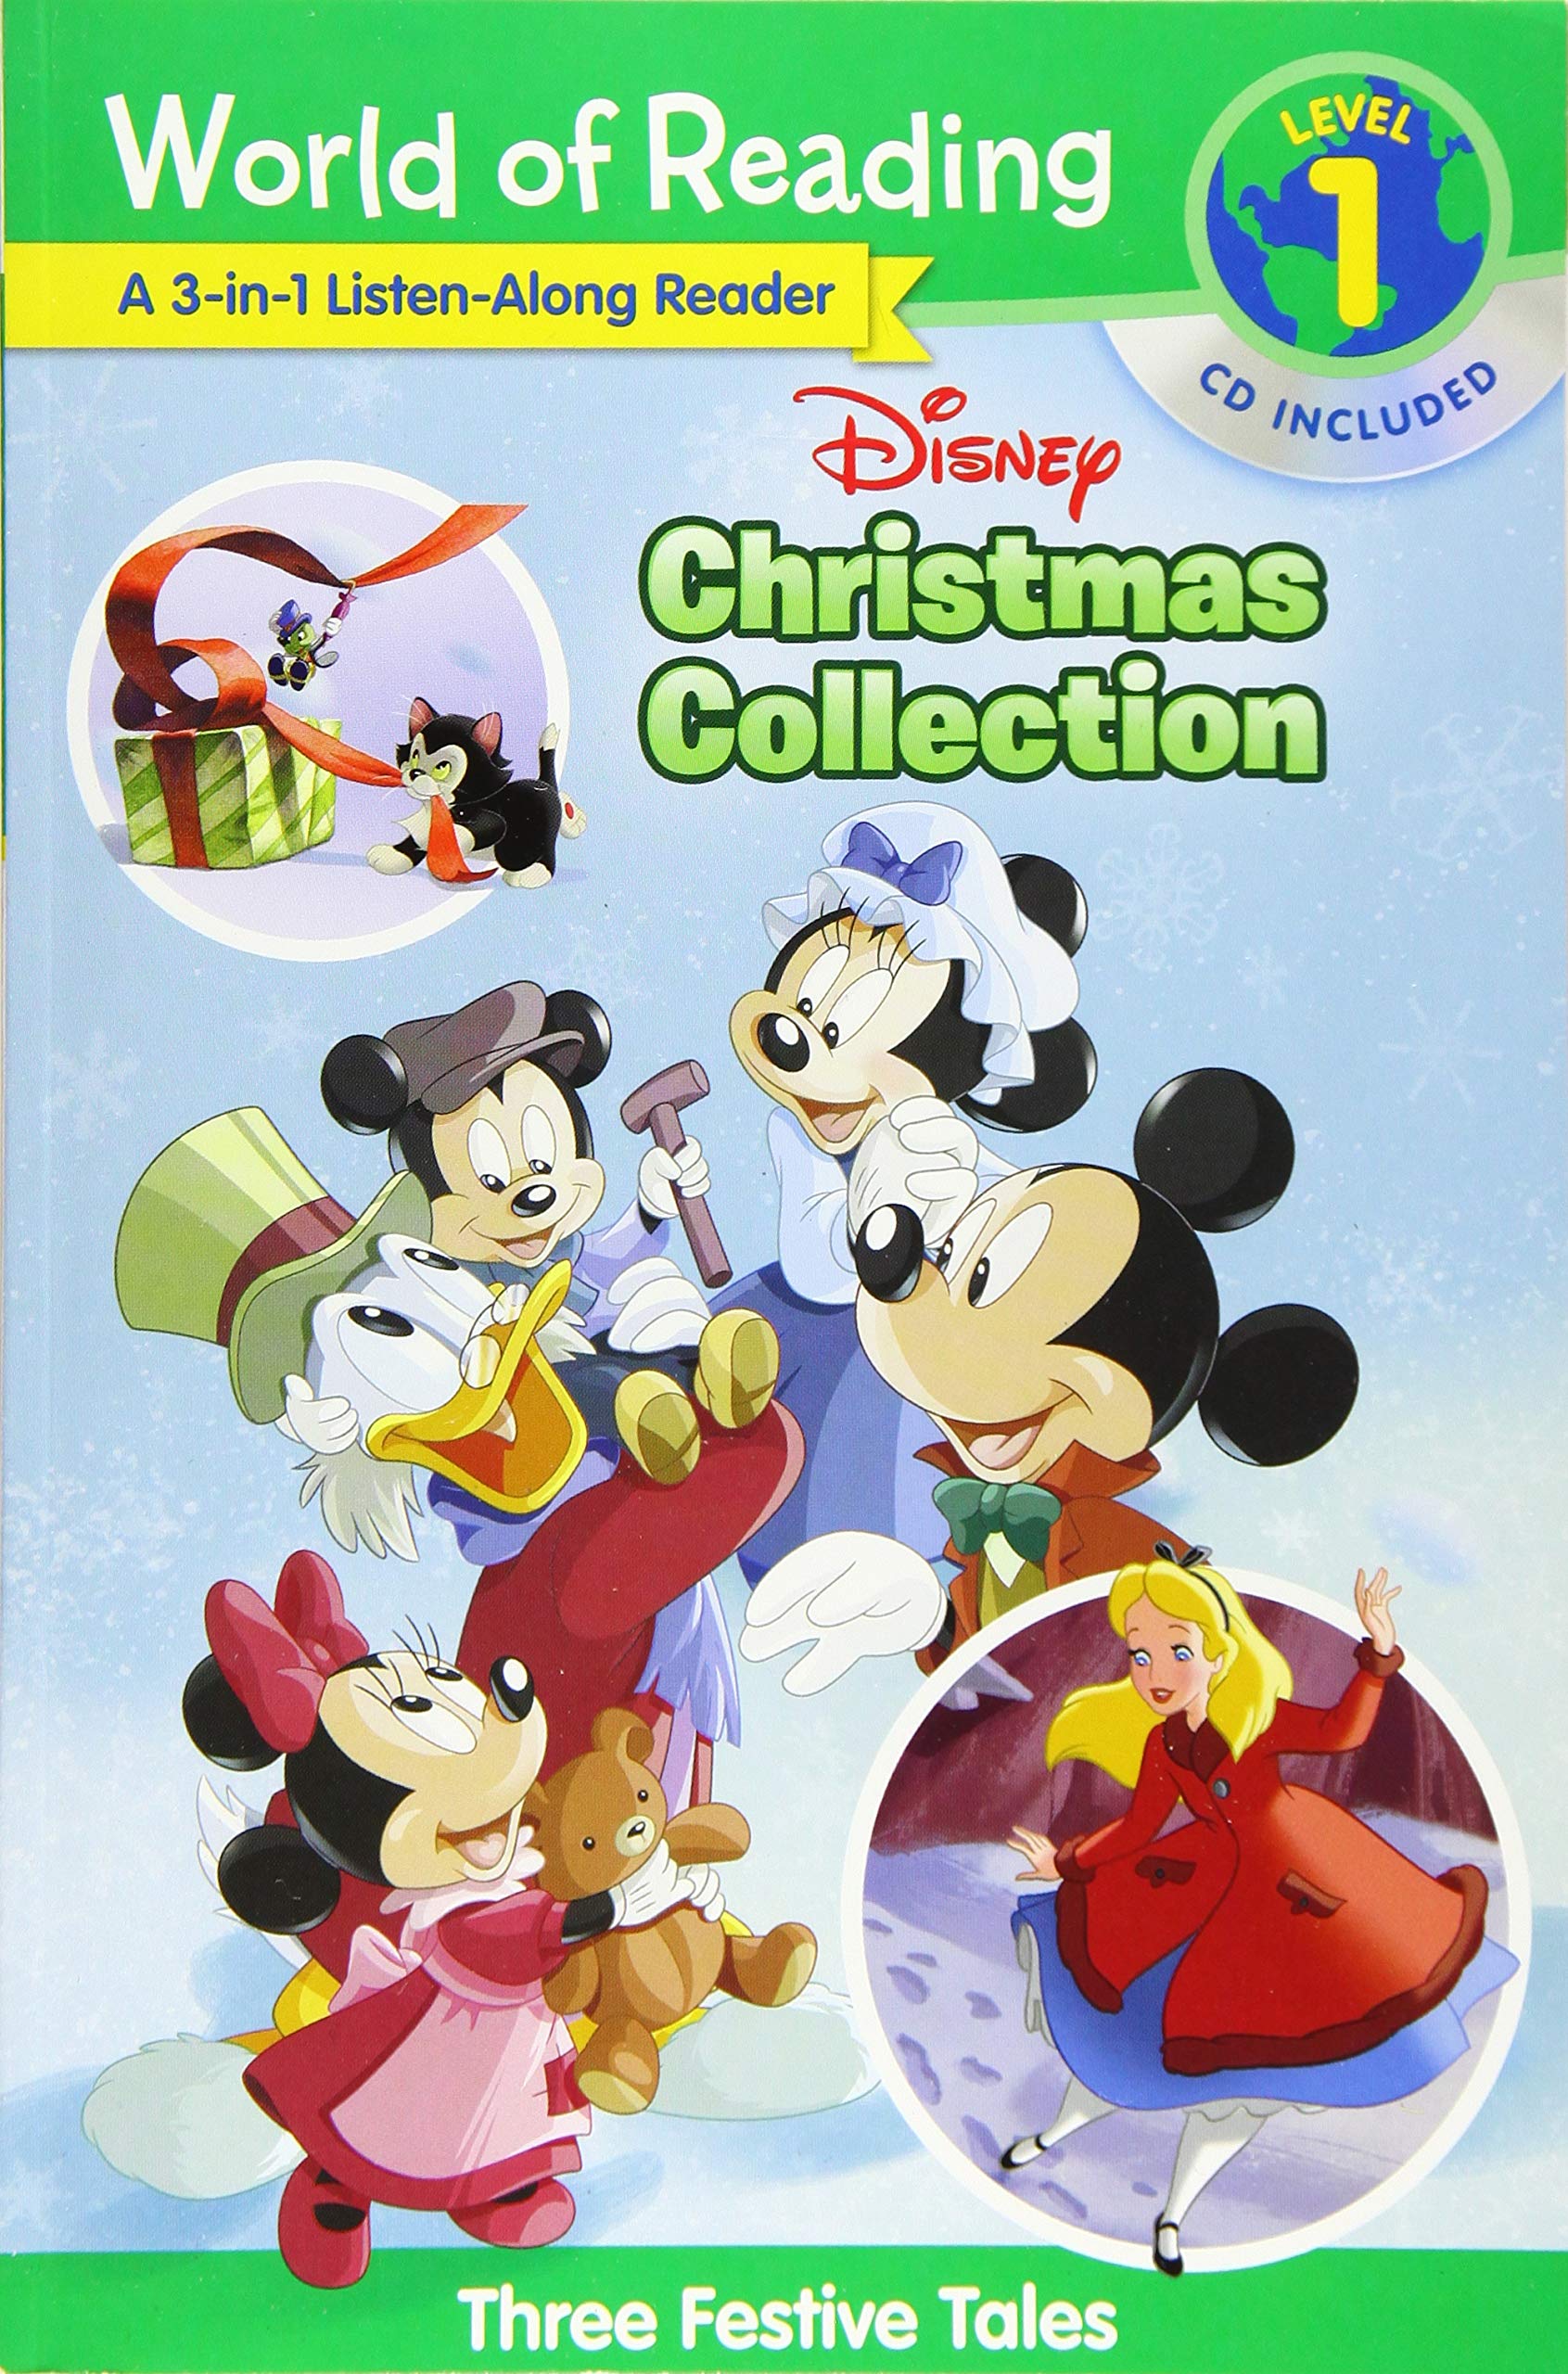 Disney Christmas Collection 3-in-1 Listen-Along Reader : 3 Festive Tales with CD! (World of Reading, Level 1) (Paperback + Spoken Word Compact Disc) [Paperback]